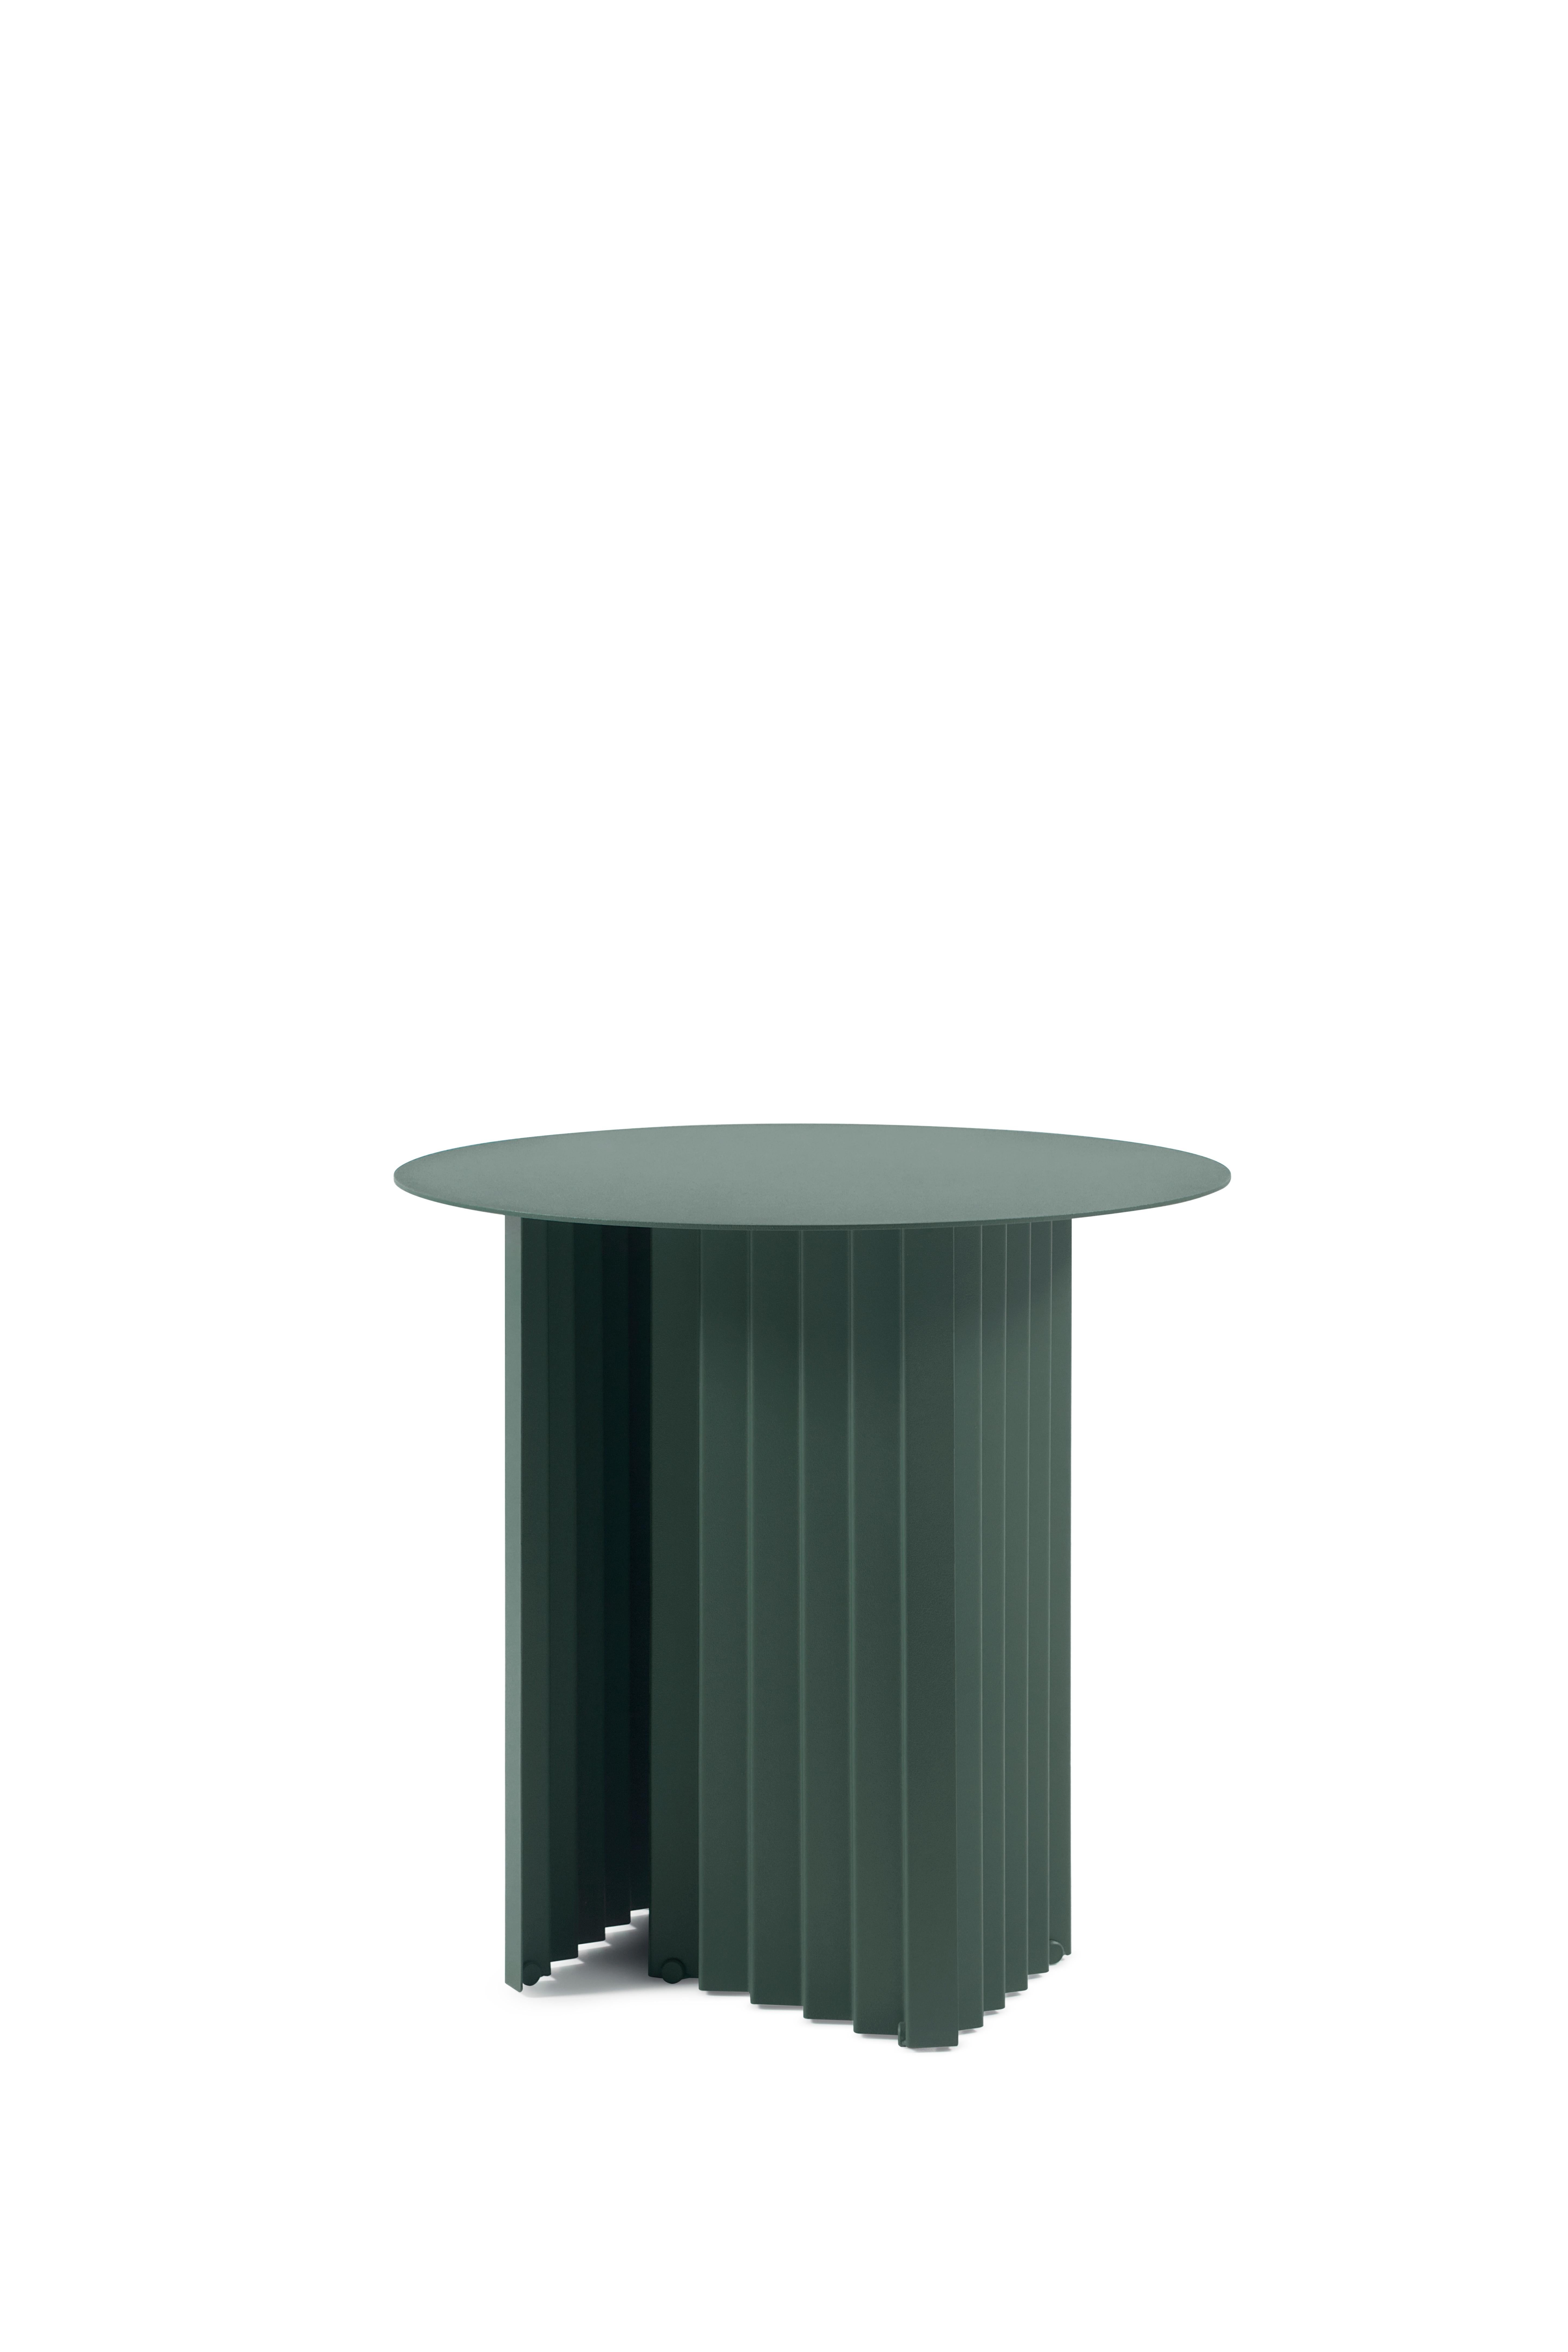 RS Barcelona Plec Round Small Table in Green Metal by A.P.O.